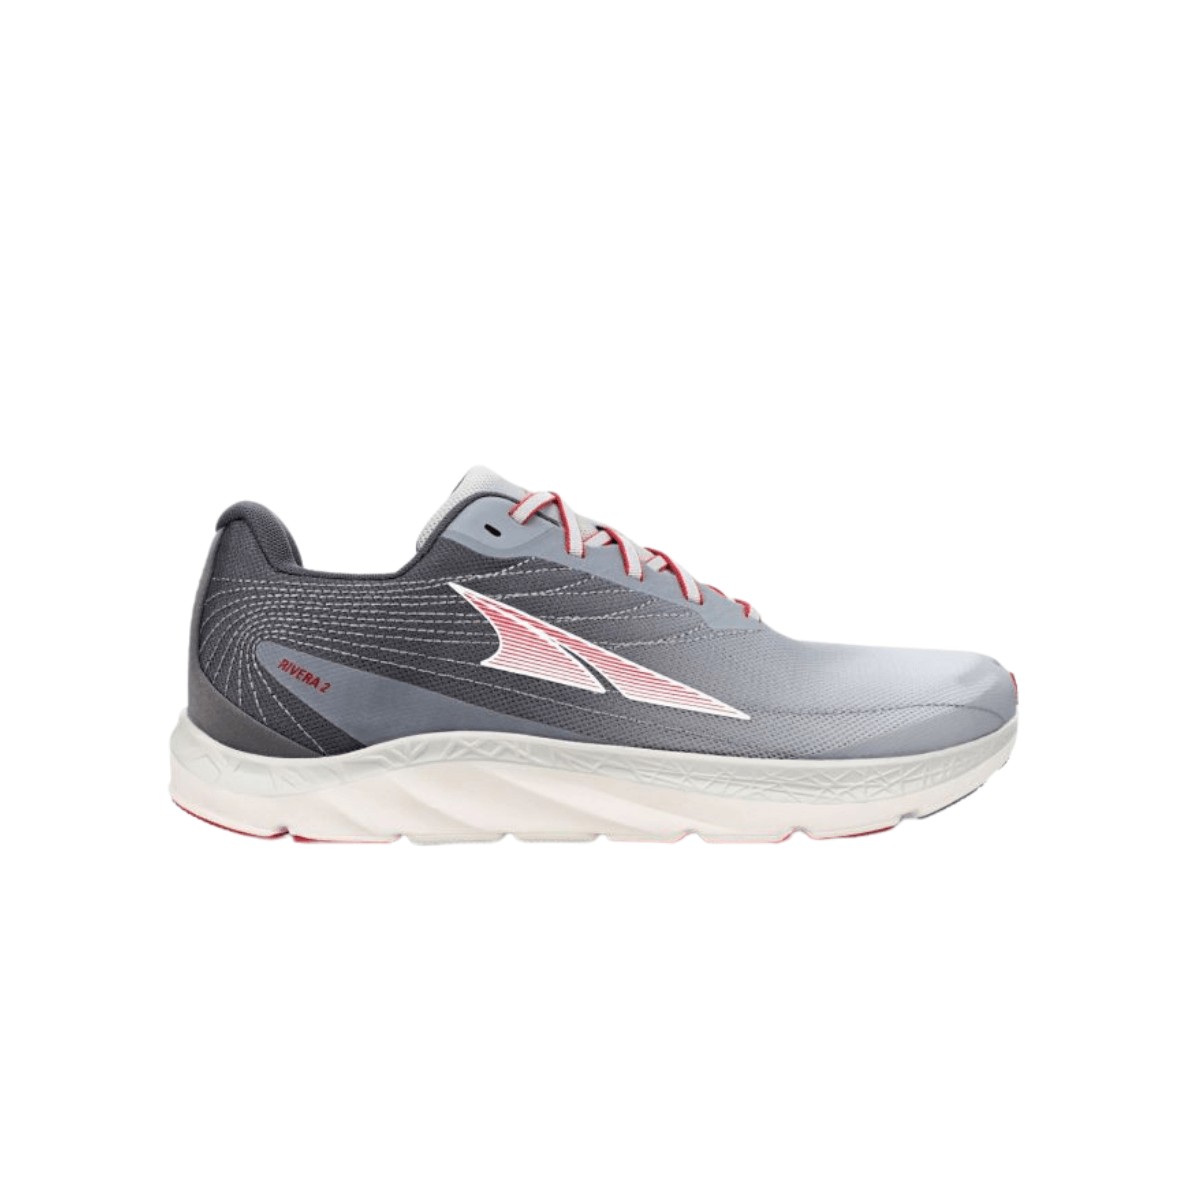 Altra Rivera 2.0 Chaussures Gris Rouge AW22, Taille 41 - EUR